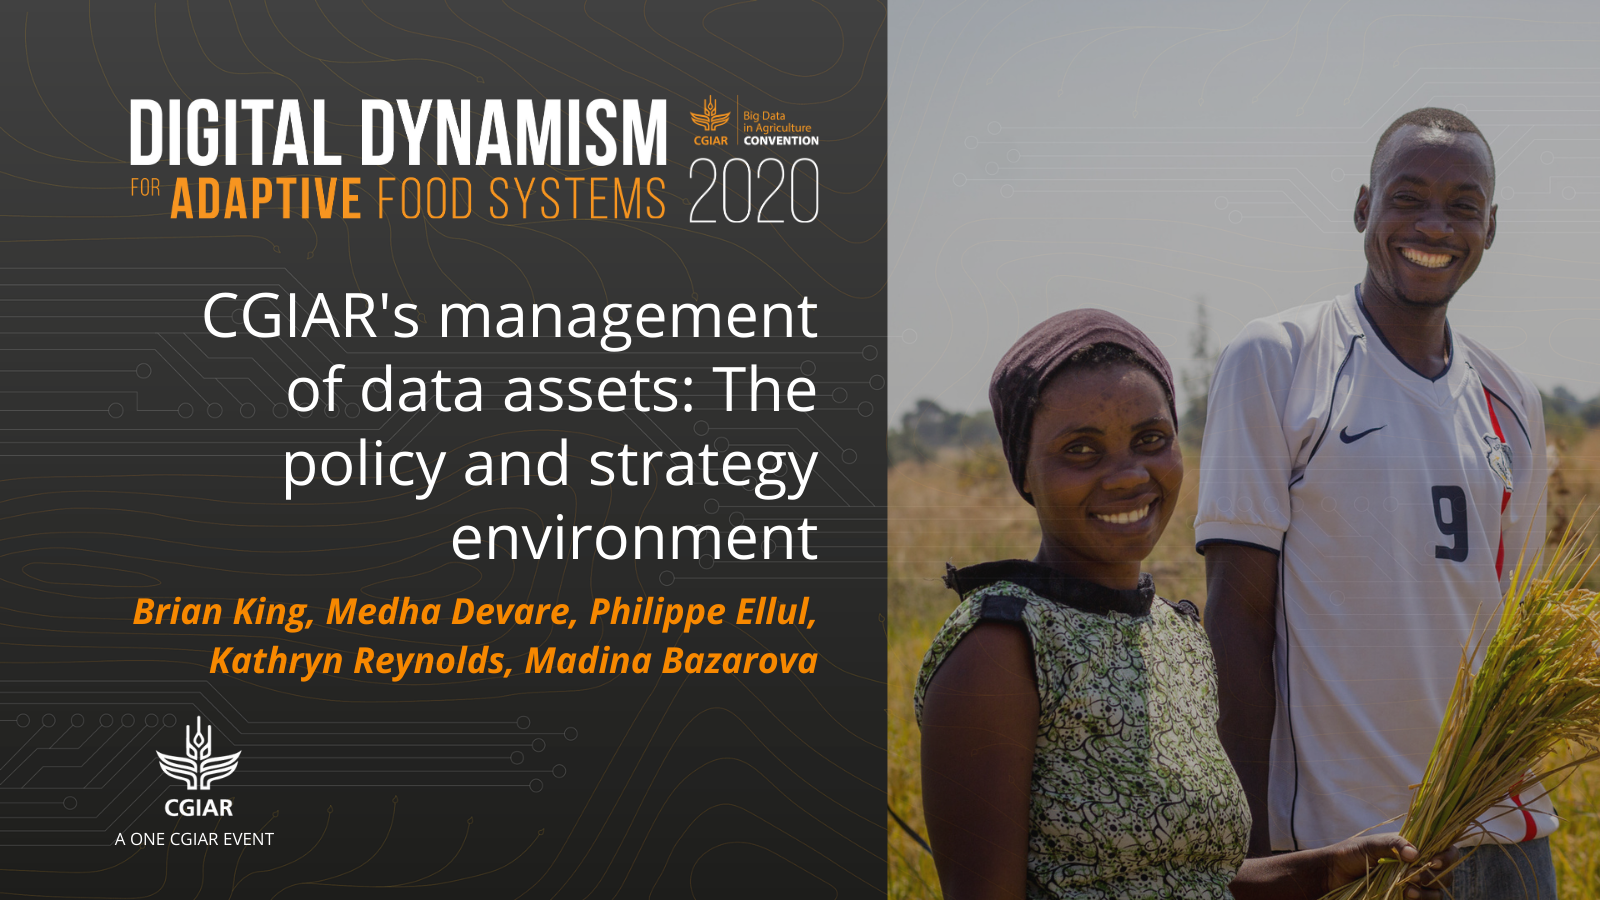 2020 Convention session - CGIAR's management of data assets